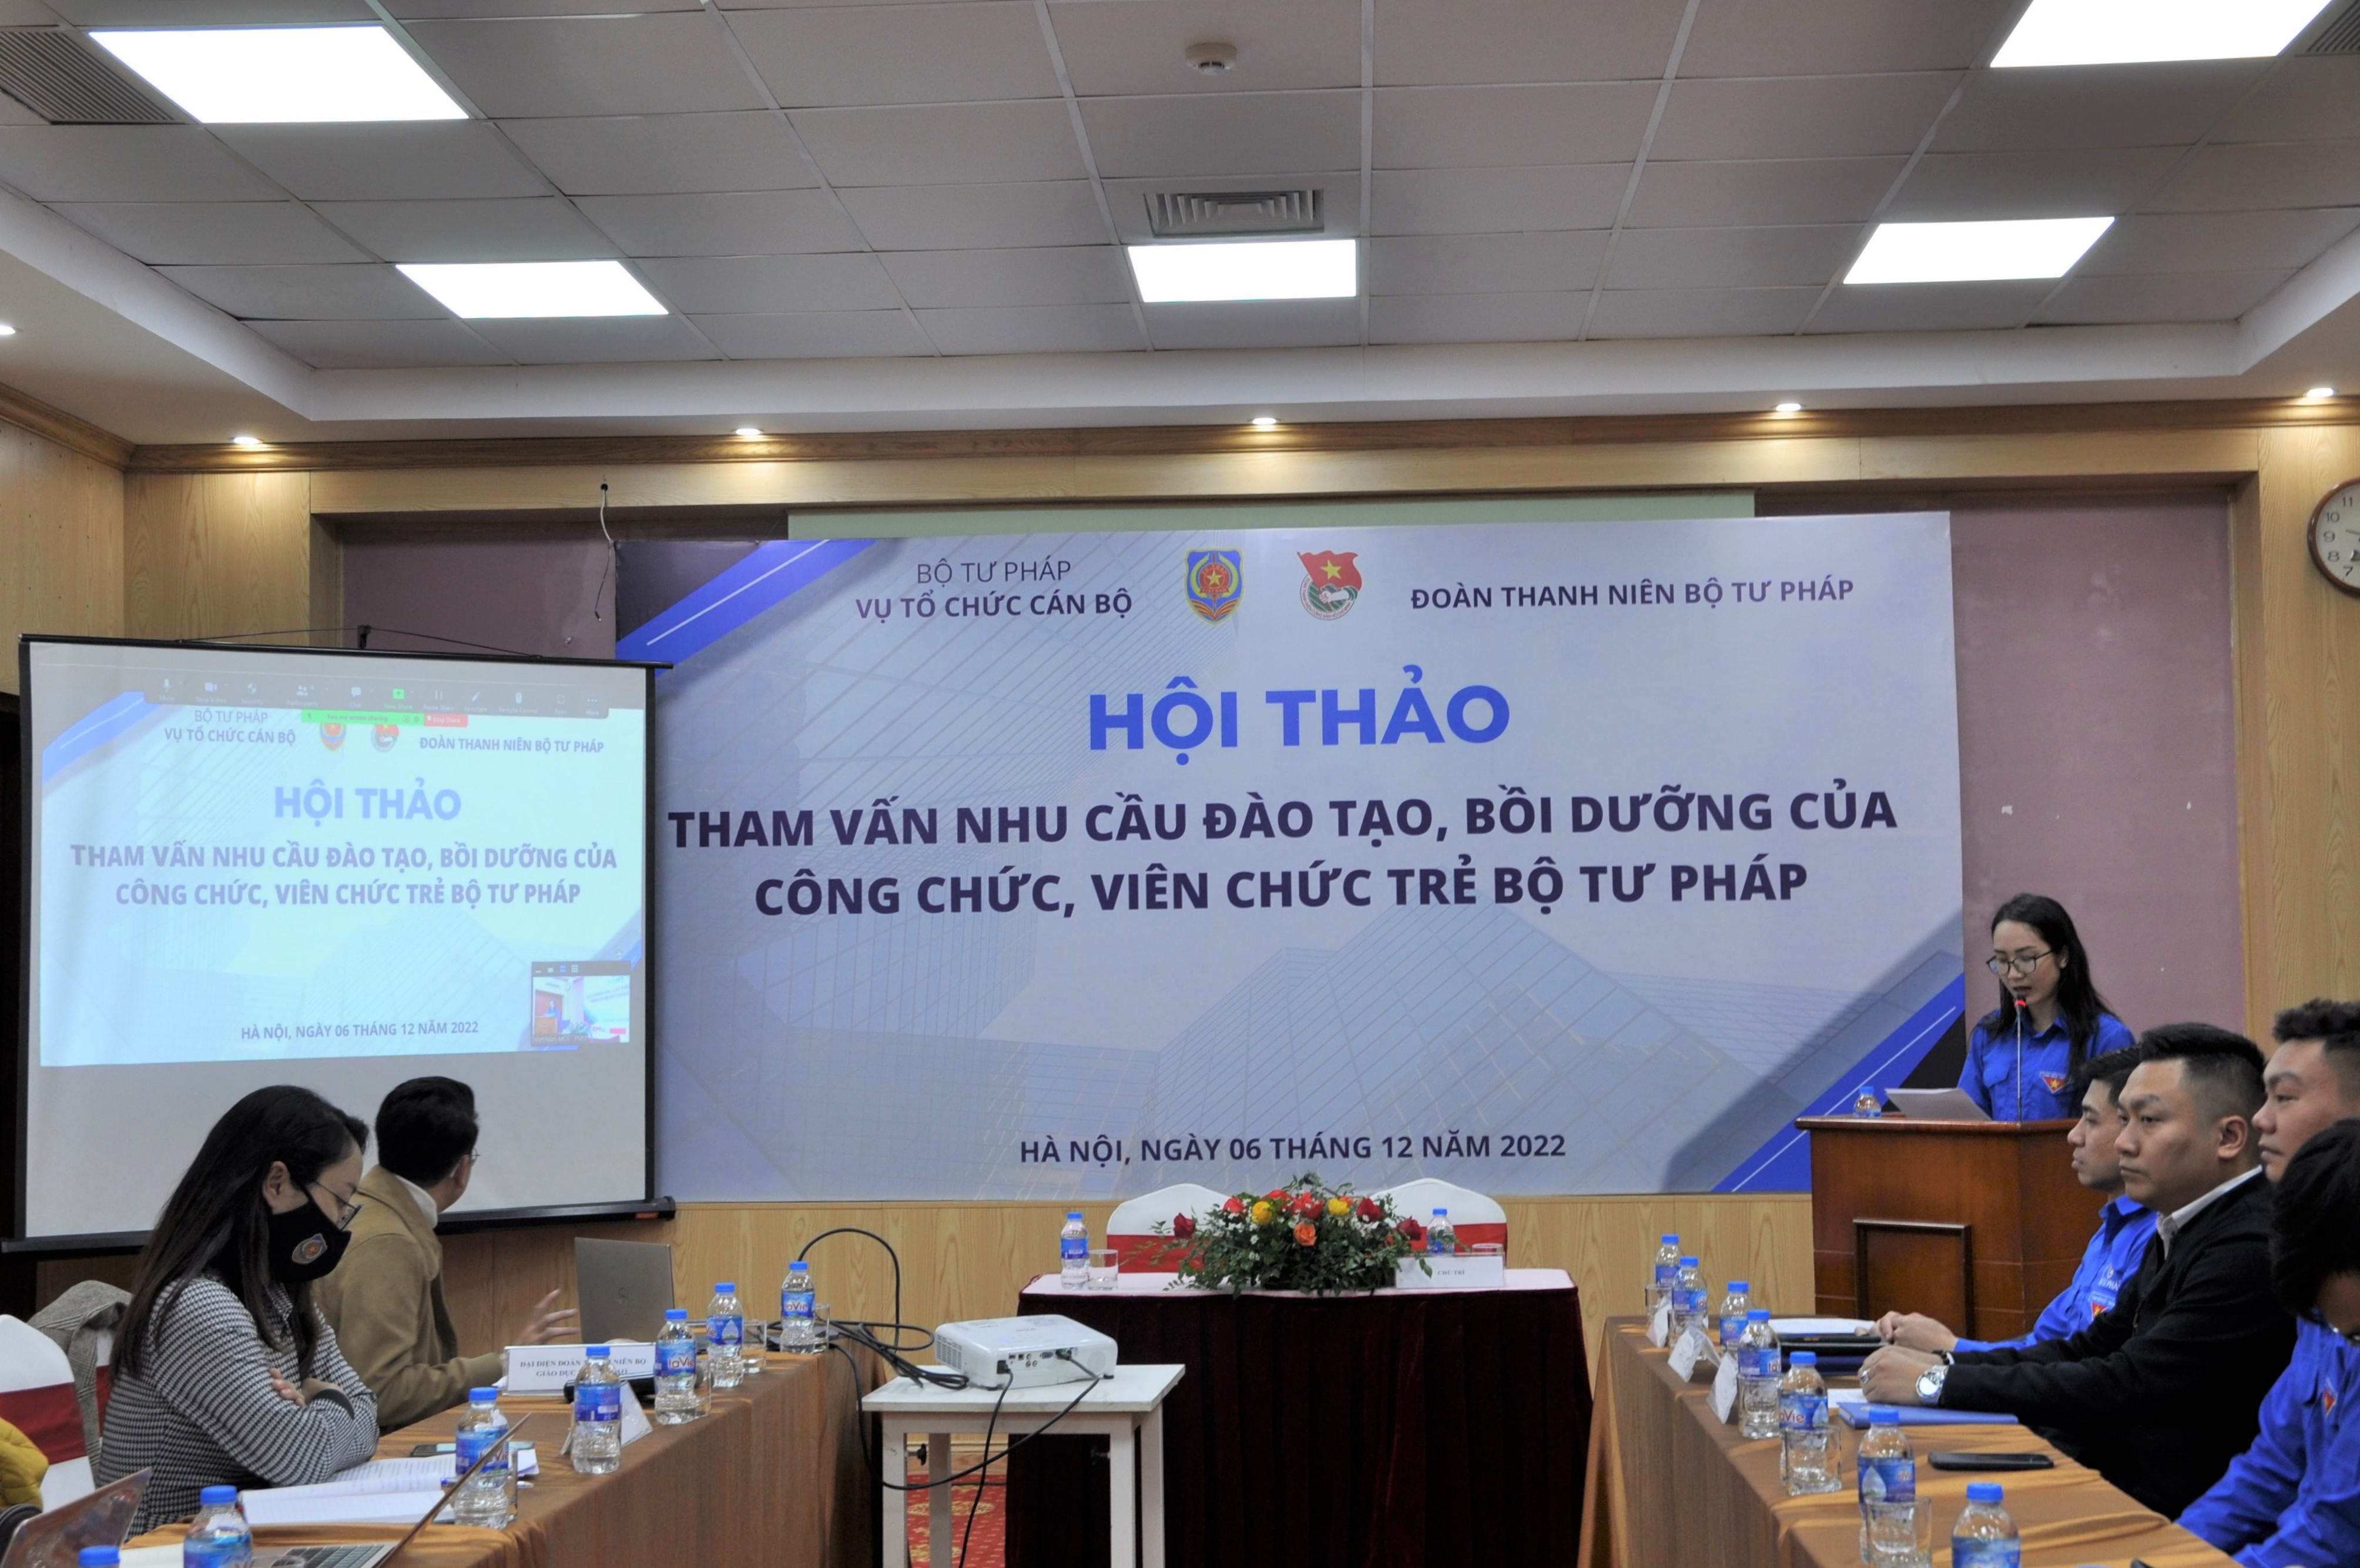 Plan for training and fostering civil servants and public employees of units under the Ministry of Finance in Vietnam 2023